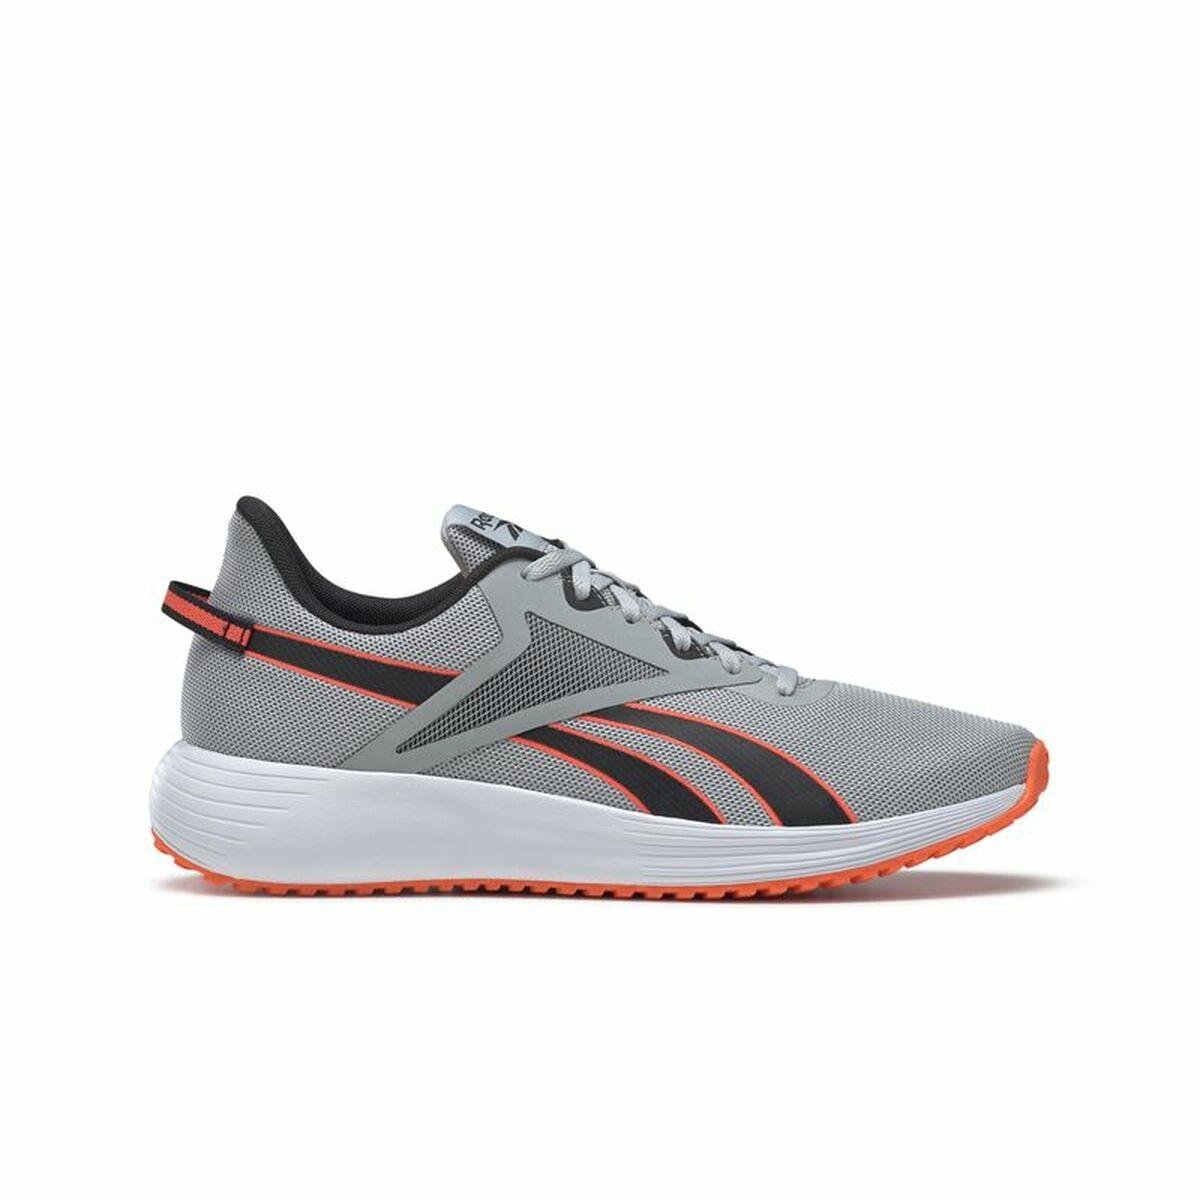 Buy Grey Sports Shoes for Men by Reebok Online